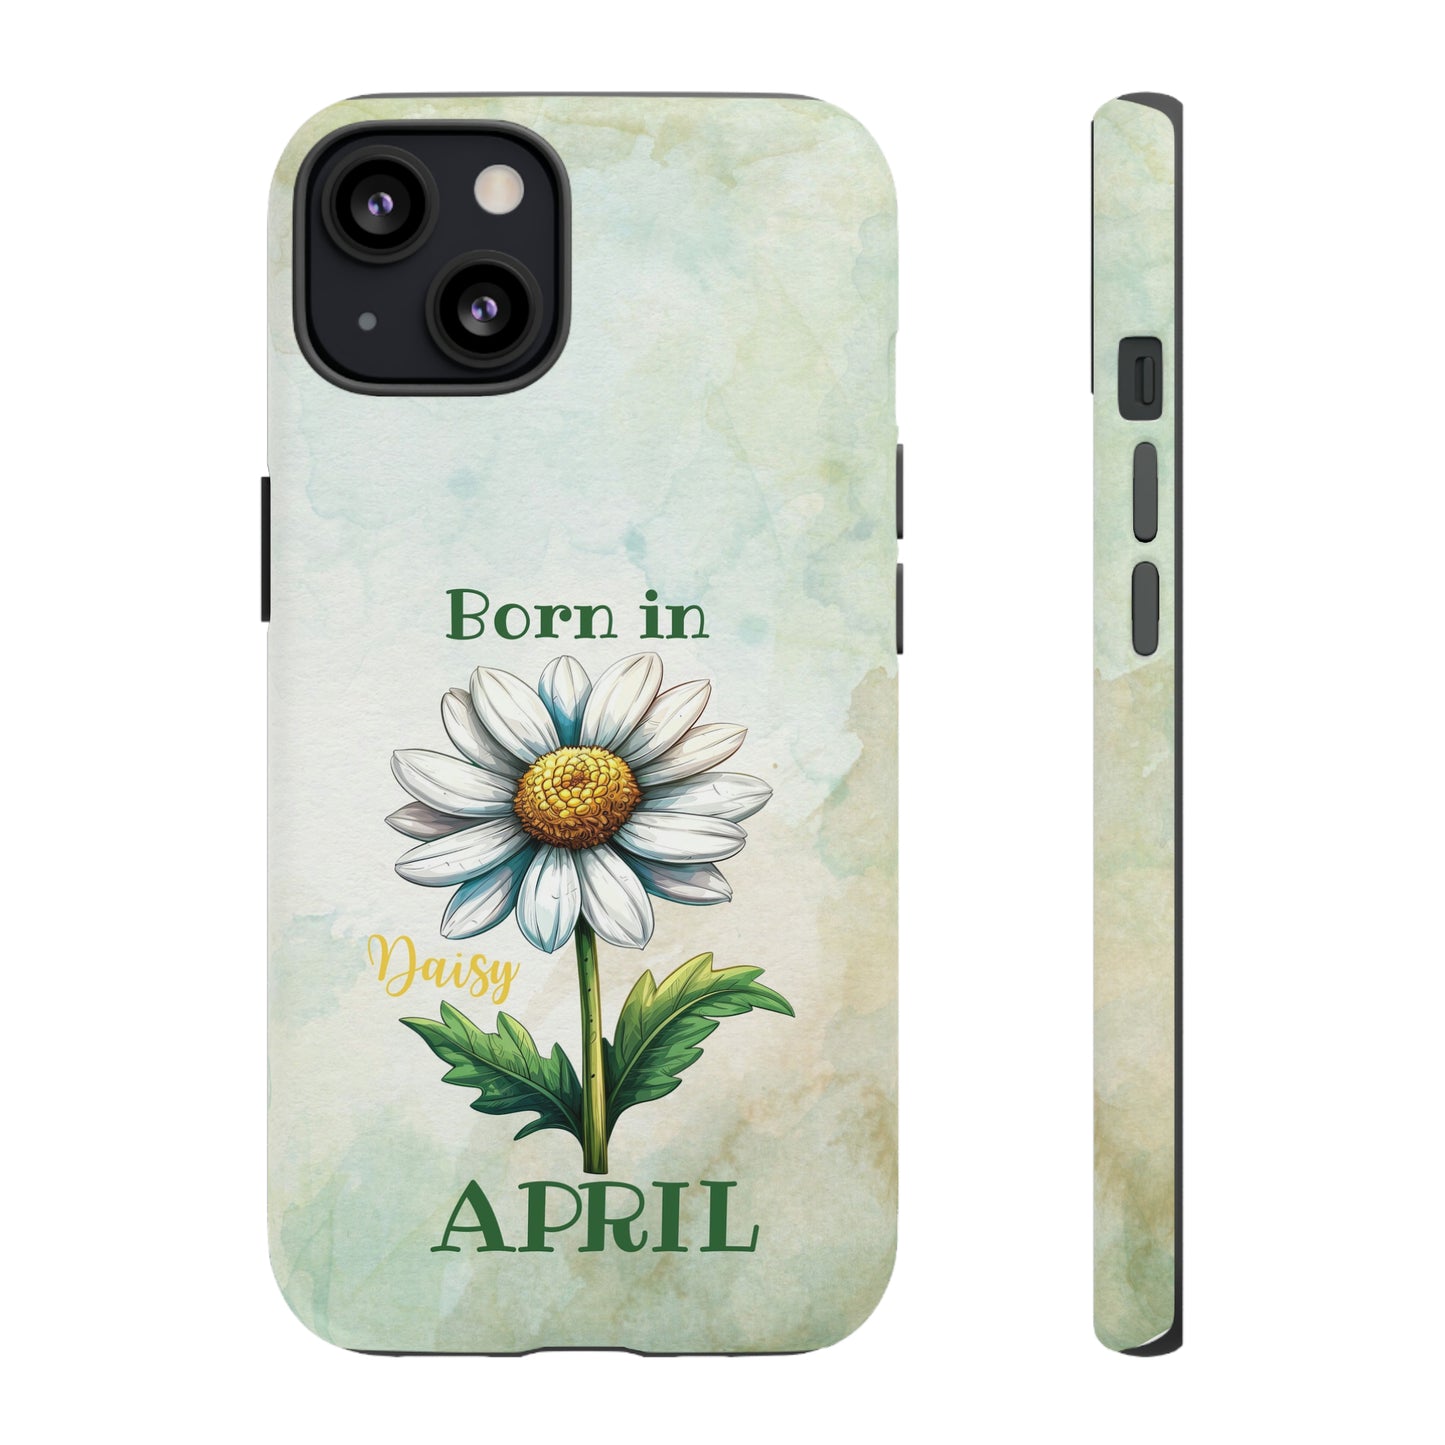 Born in April IPhone Cases, April Birthday, Daisy Flower IPhone Case